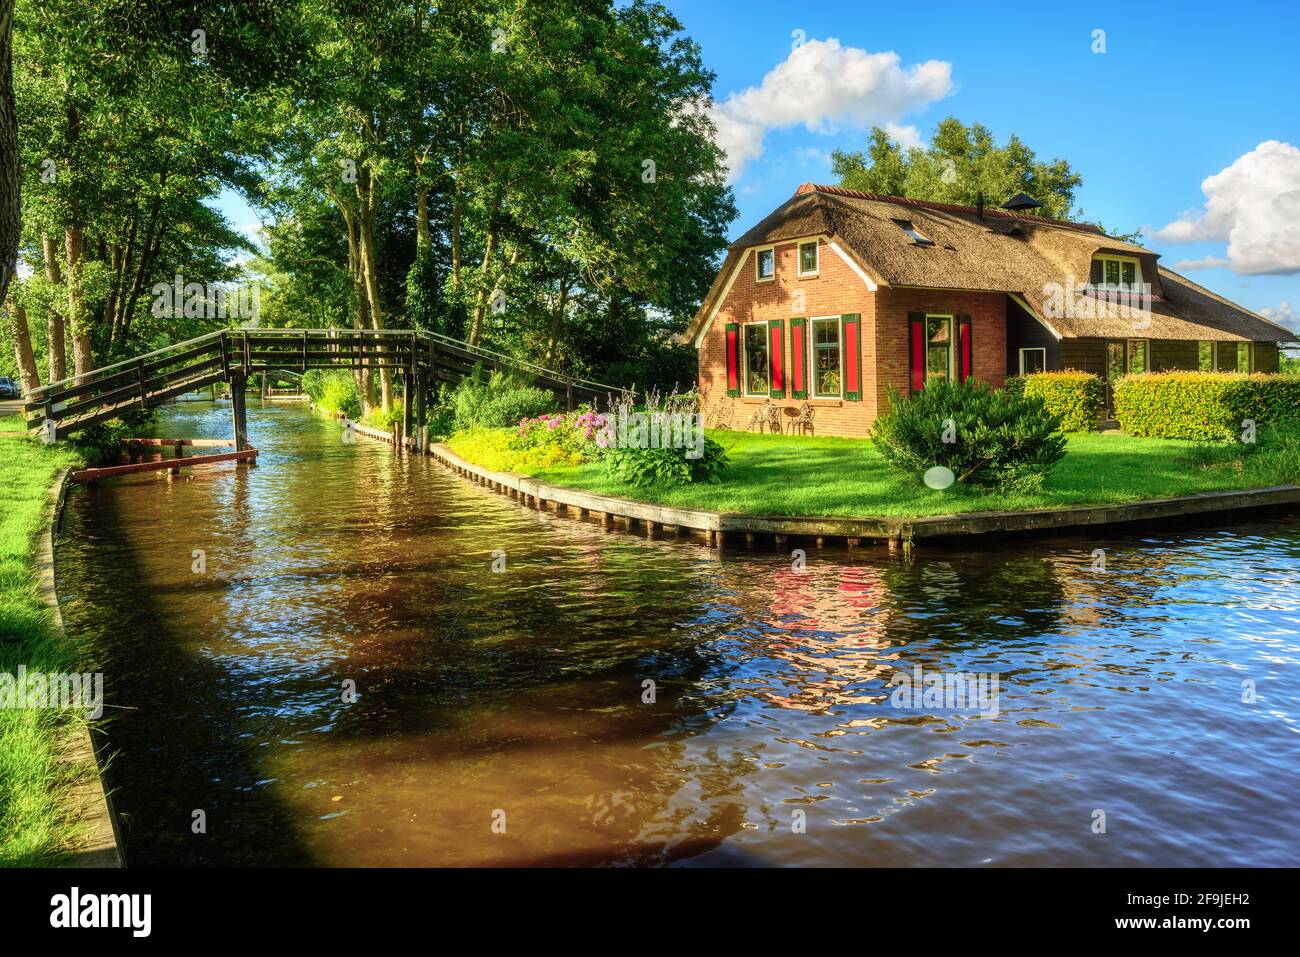 Idyllic Giethoorn village in Netherlands, called 'Dutch Venice', famous for its canals and waterways Stock Photo